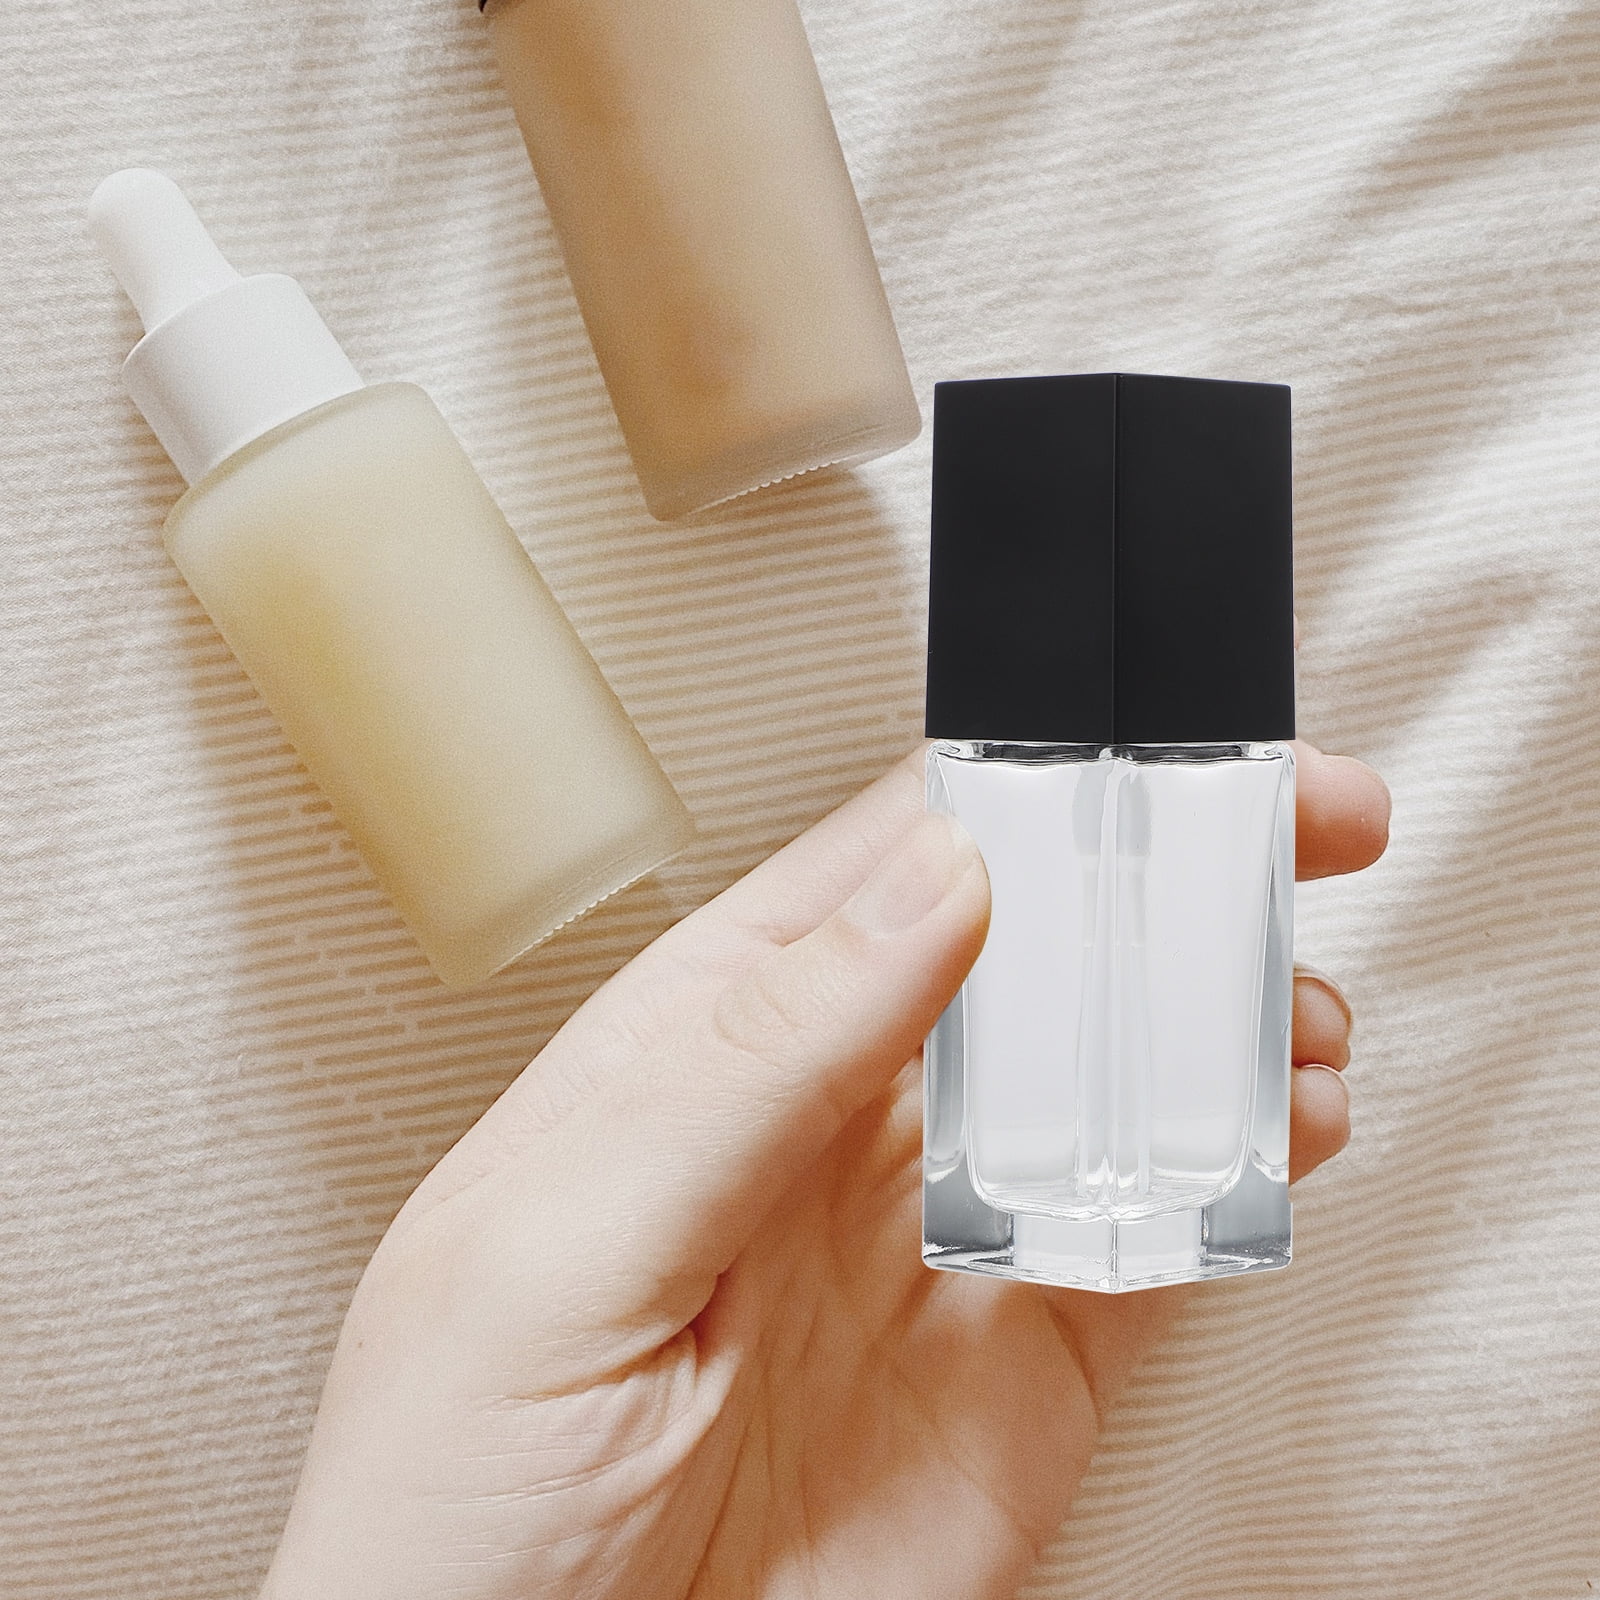 30ml Square Clear Glass Liquid Foundation Bottle with Black Plastic